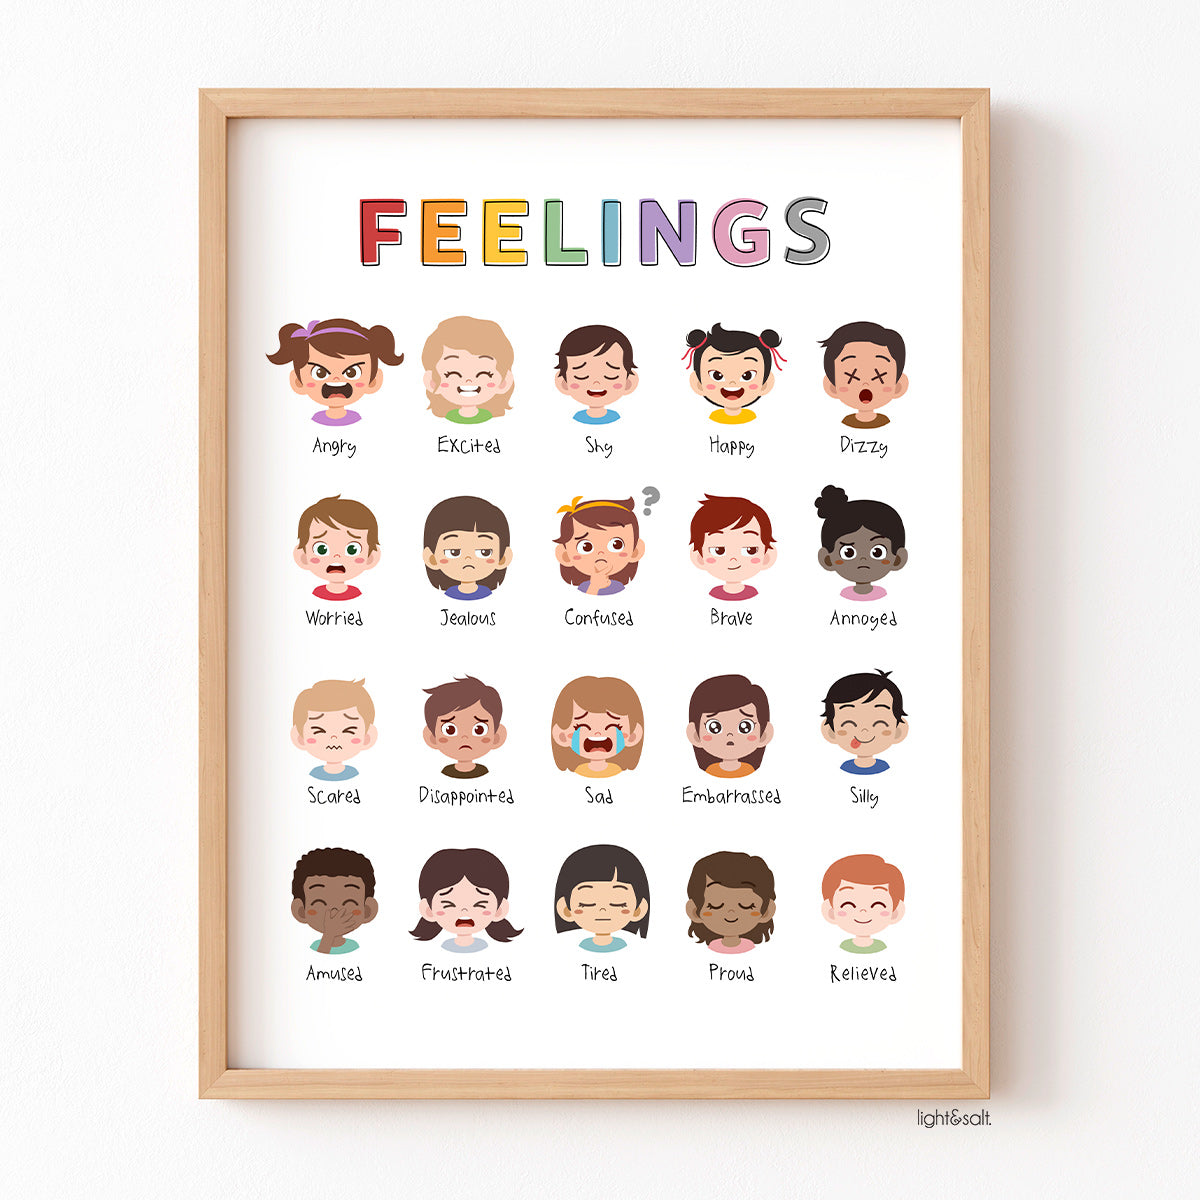 Feelings and emotions poster